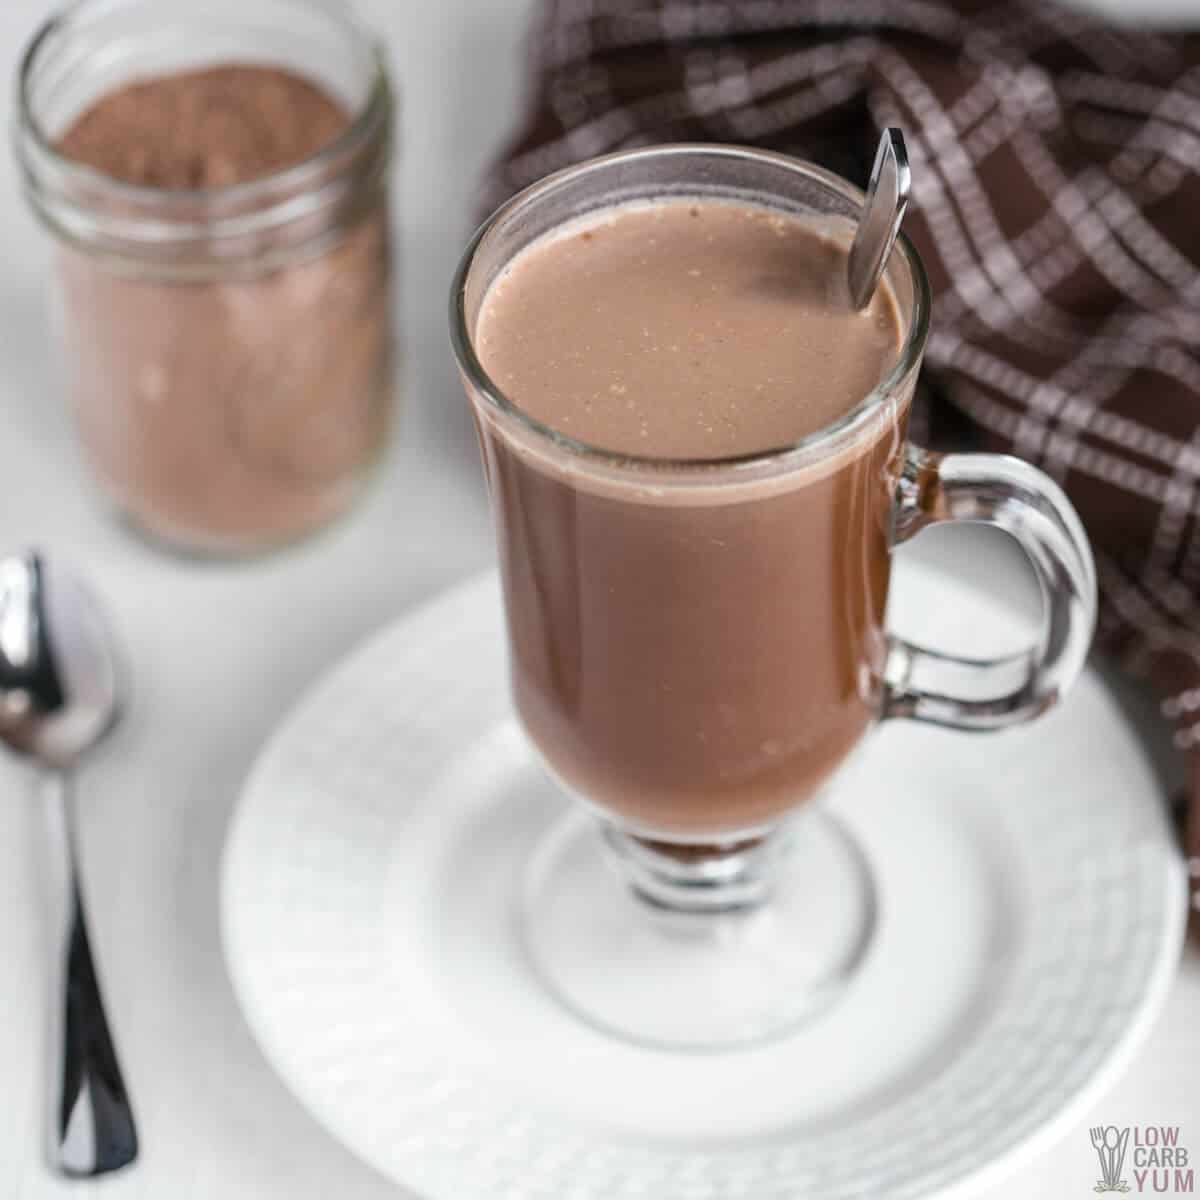 hot chocolate in glass mug without whipped cream.